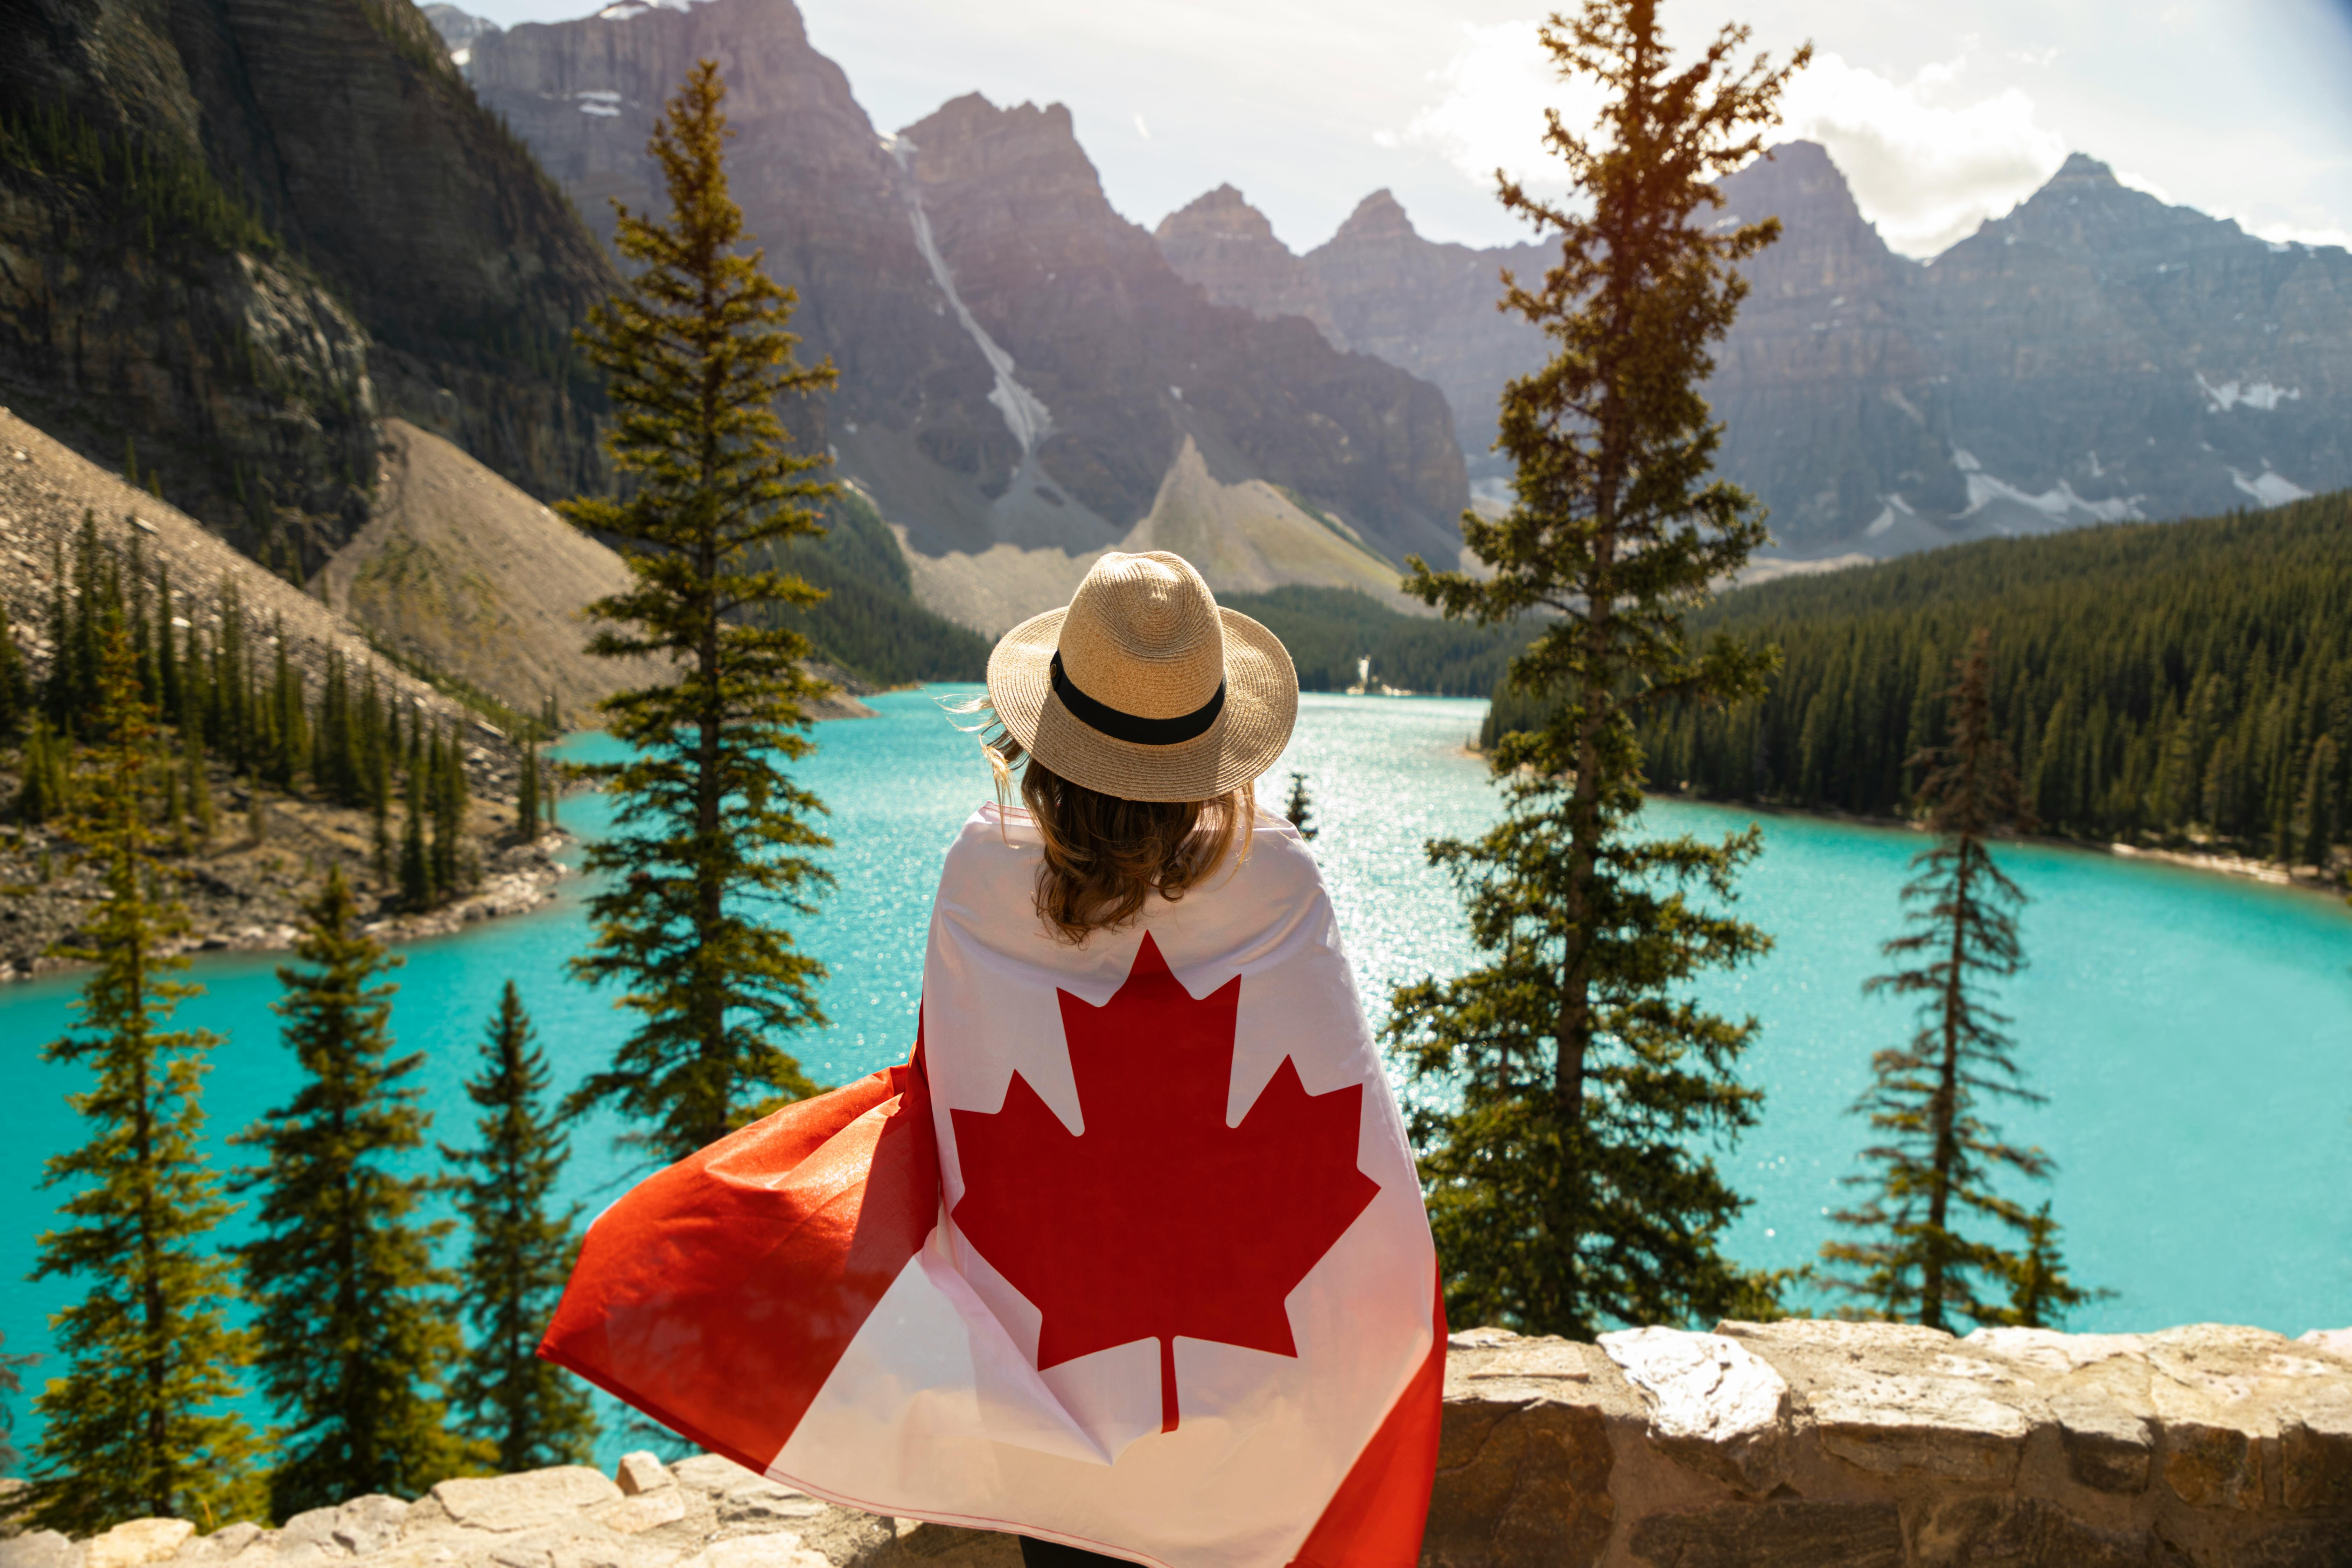 Canada Flag Photos, Download The BEST Free Canada Flag Stock Photos & HD  Images